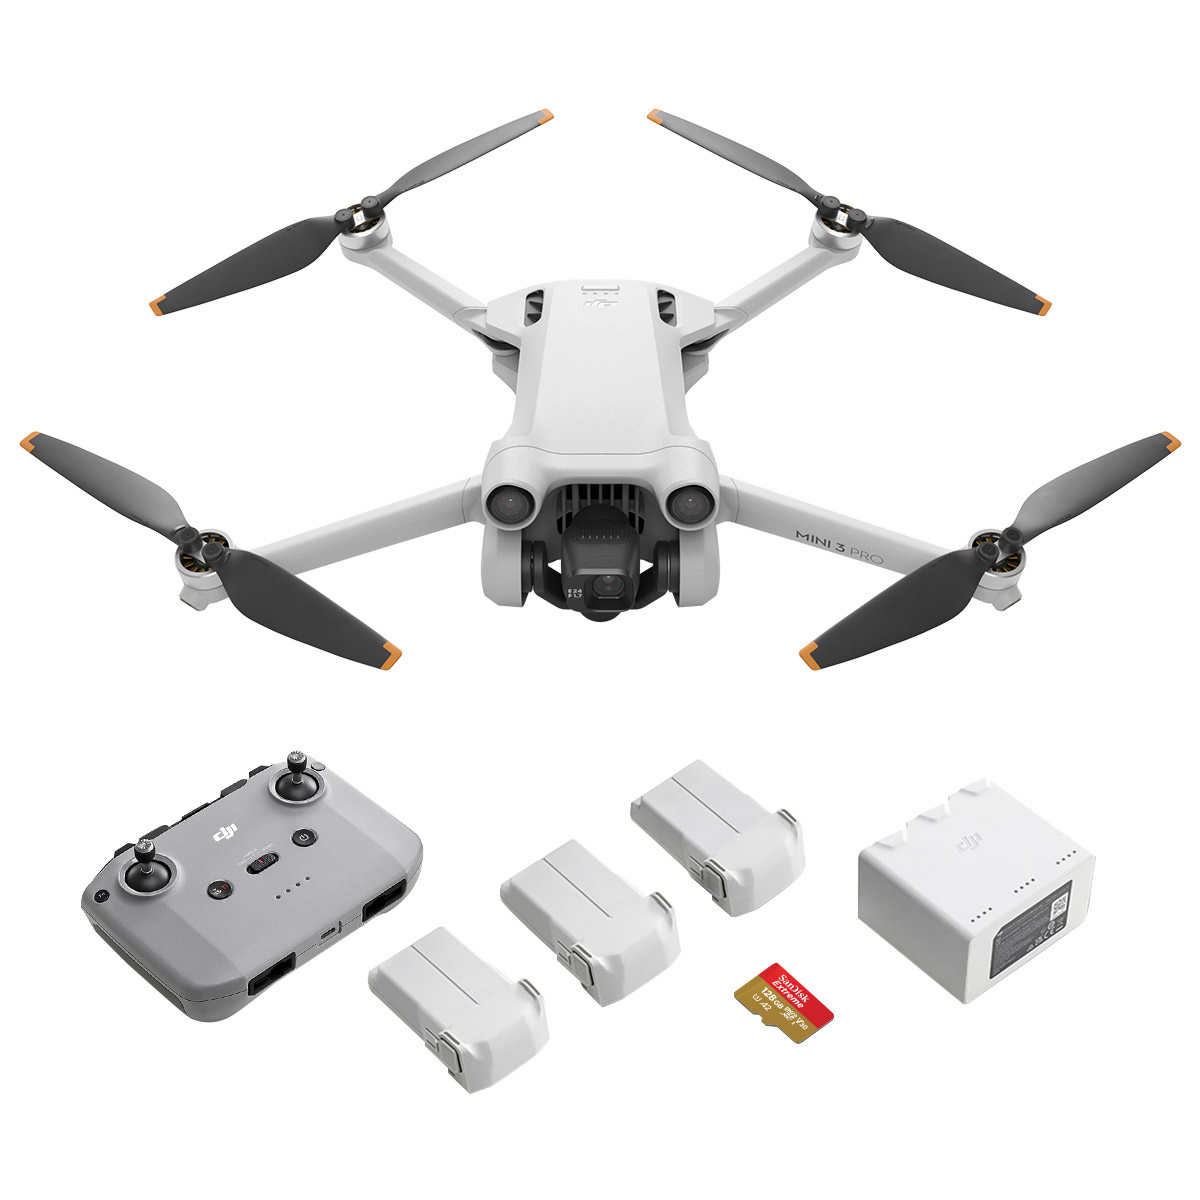 DJI Mavic Mini Fly More Combo Drone FlyCam Quadcopter Bundle with SD Card  and More, 4K